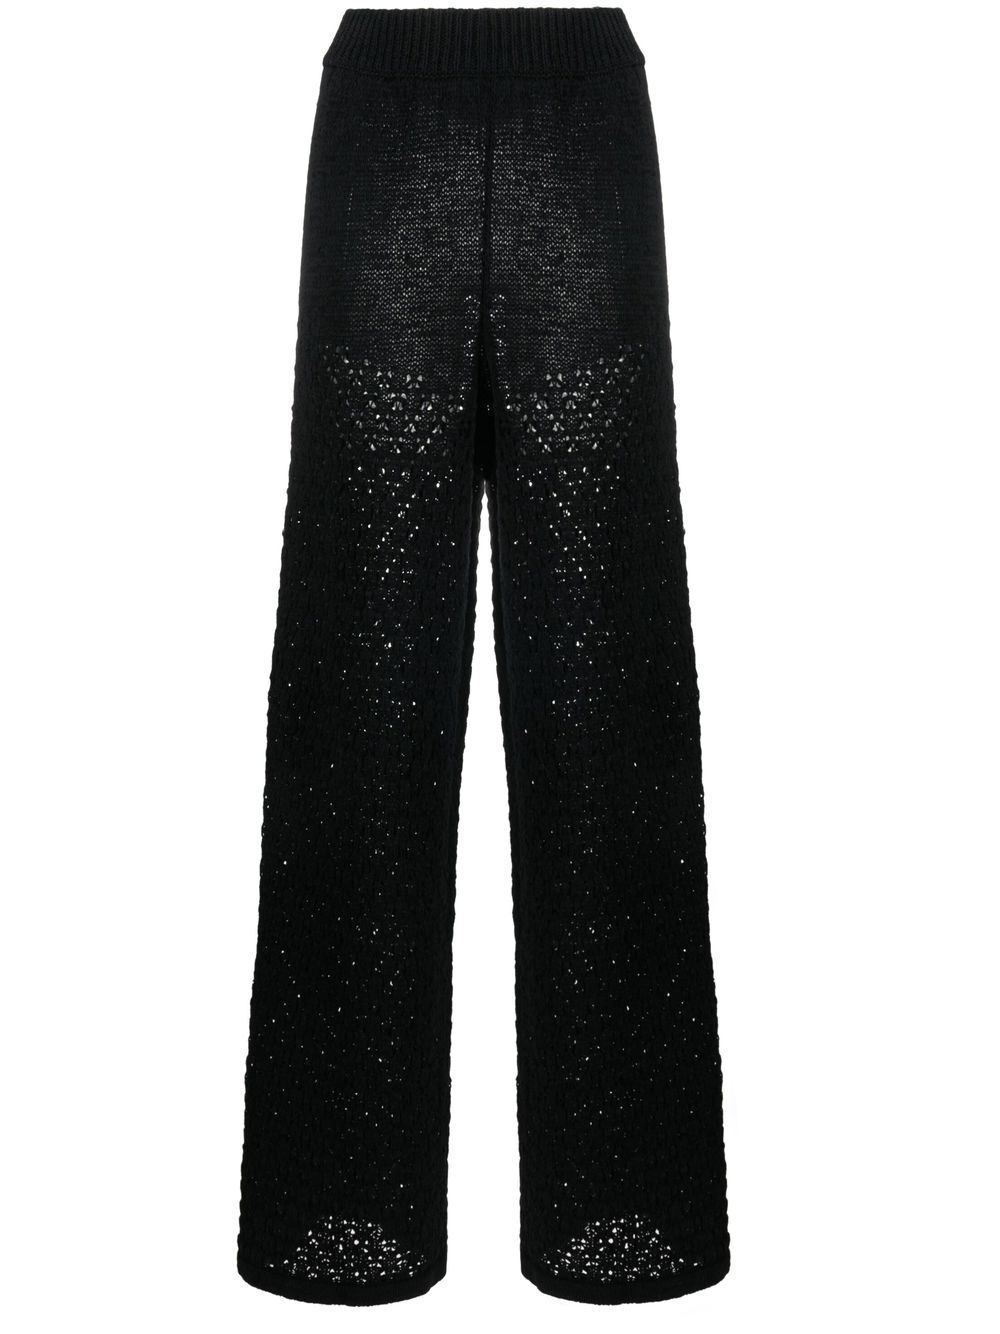 loose-knit high-waisted trousers